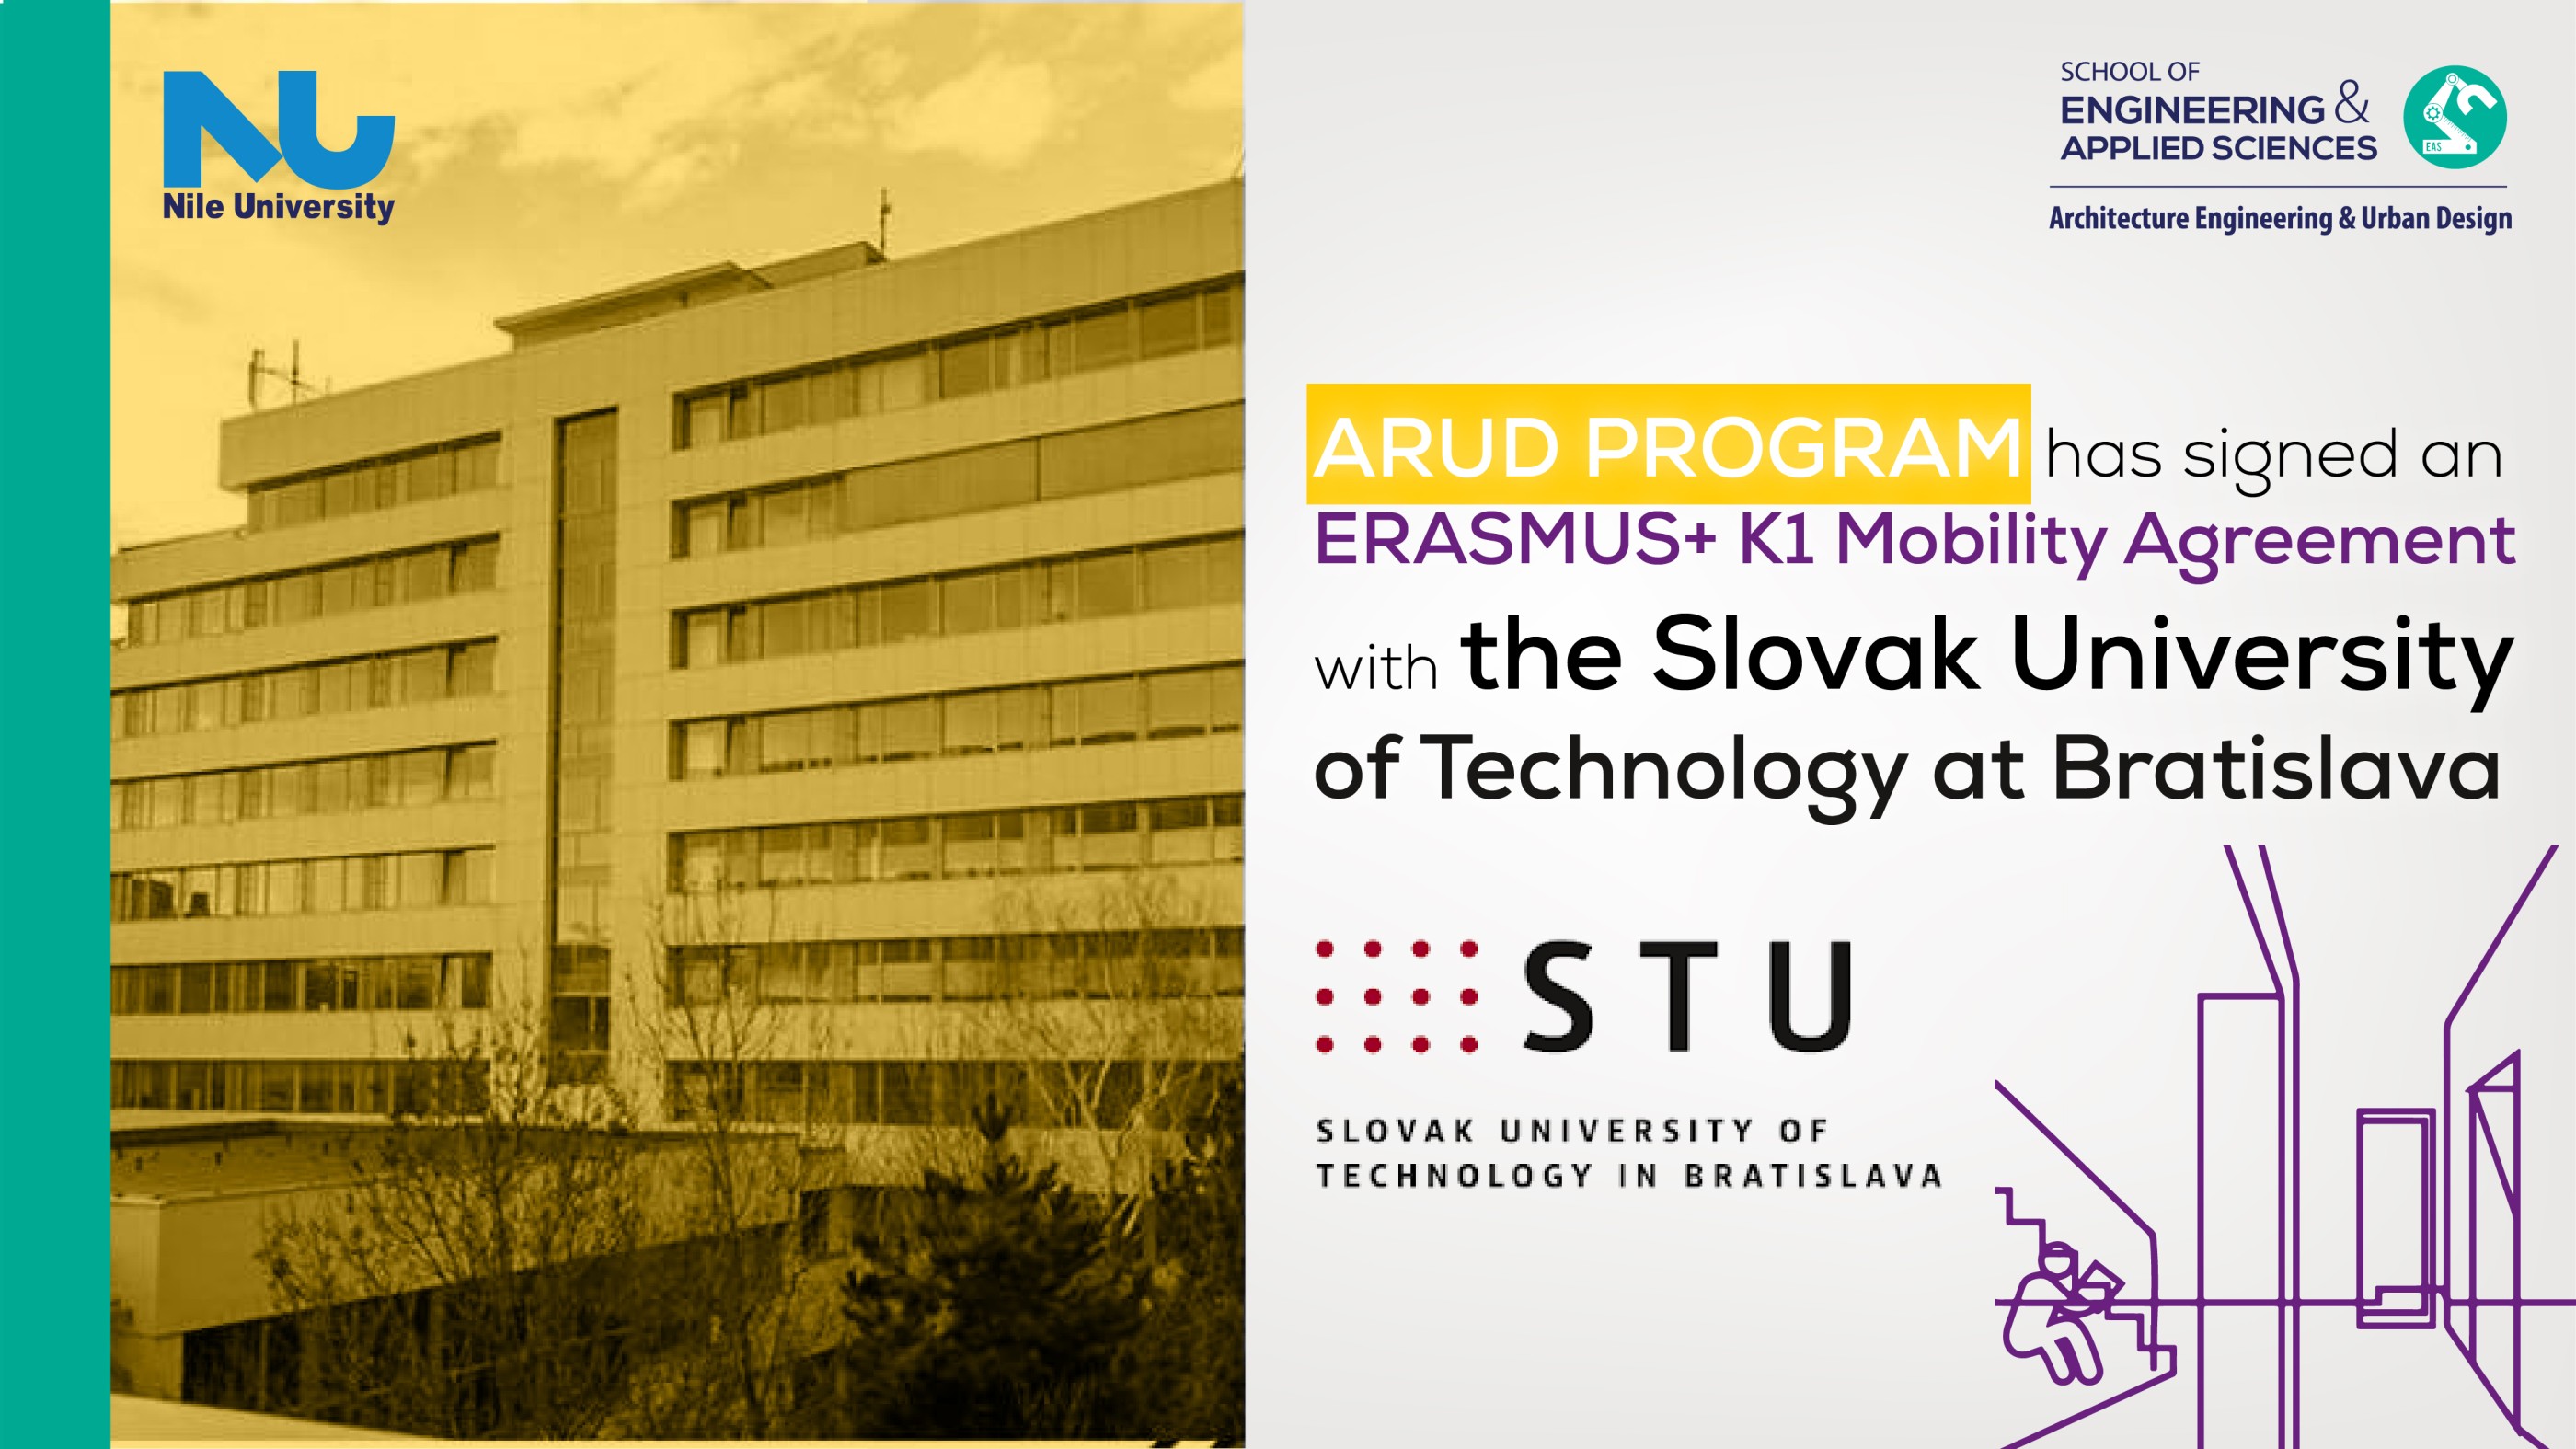 The Architecture and Urban Design (ARUD) program at Nile University has signed an ERASMUS+ K1 Mobility Agreement with the Slovak University of Technology 